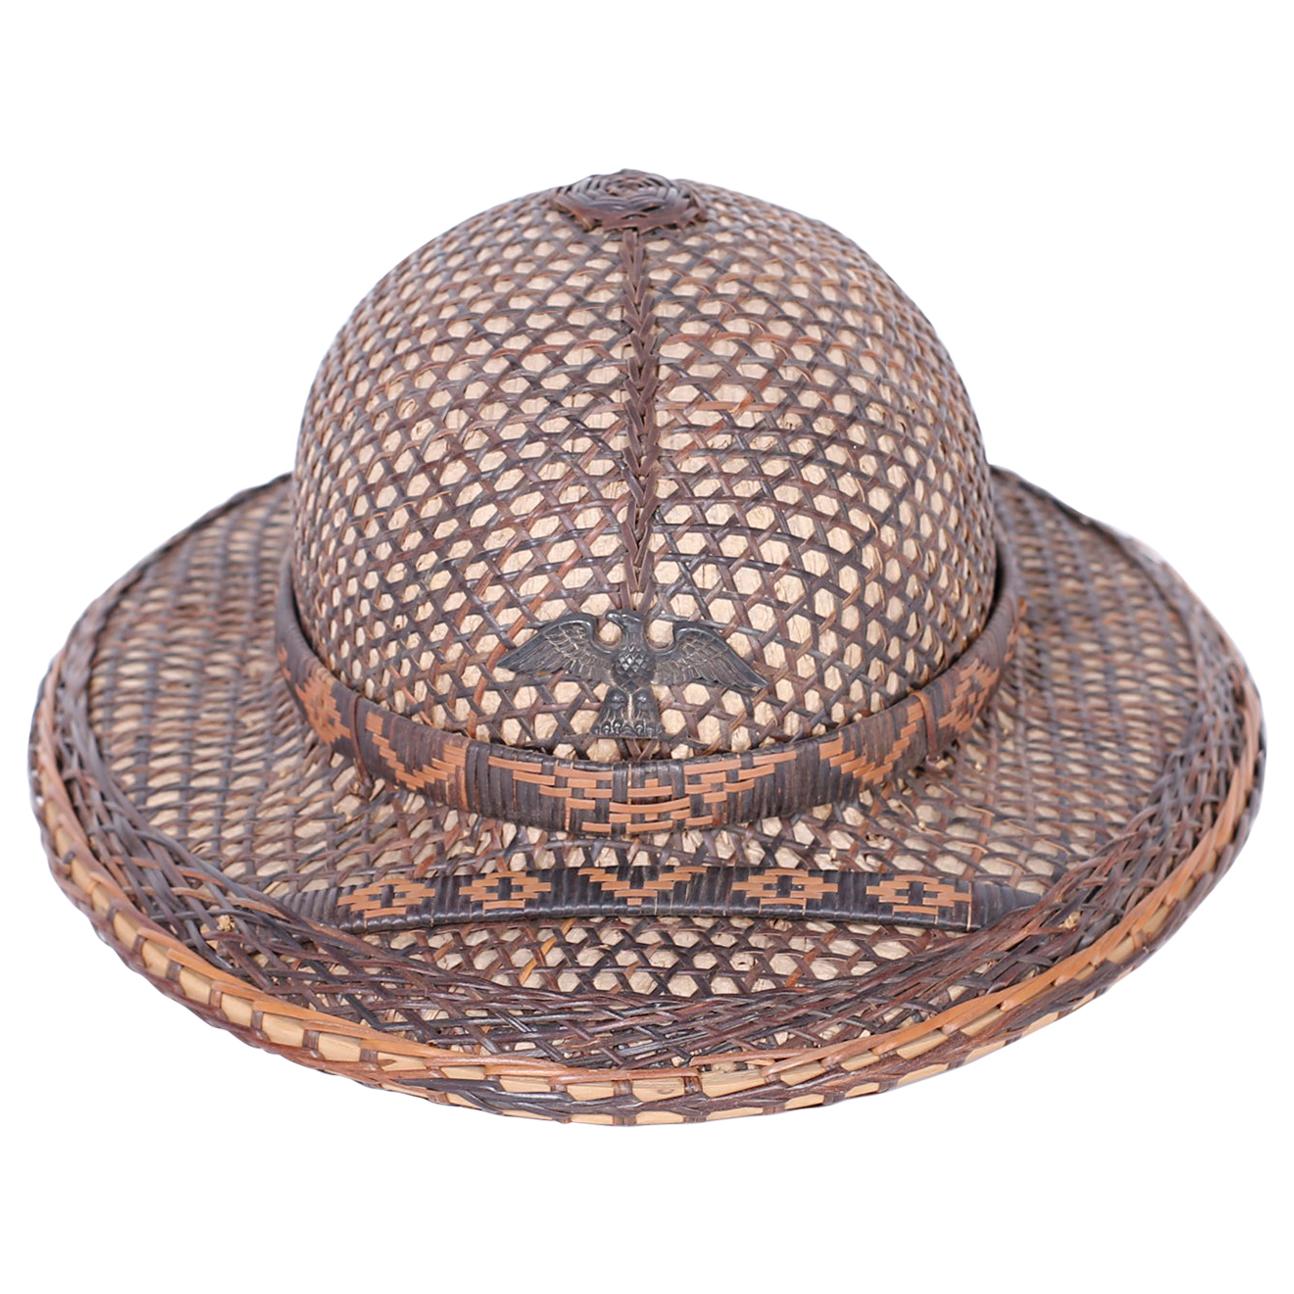 Anglo-Indian Rattan and Wicker Pith Helmet